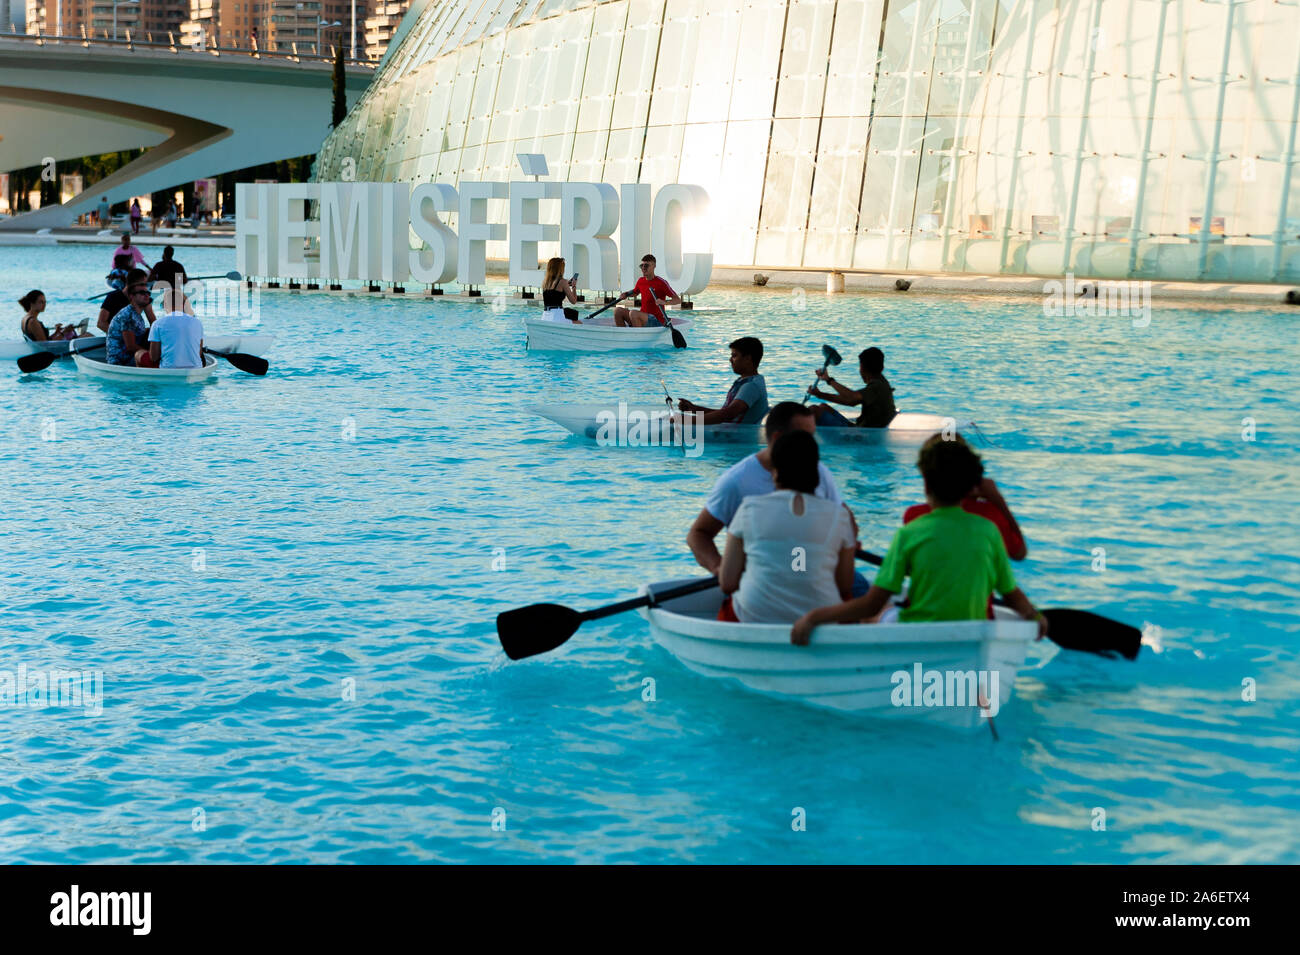 Valencia, Spain - 10 august 2019: people enjoy a boat ride inside the pool of city of arts and sciences in valencia at sunset with queen sofia palace Stock Photo